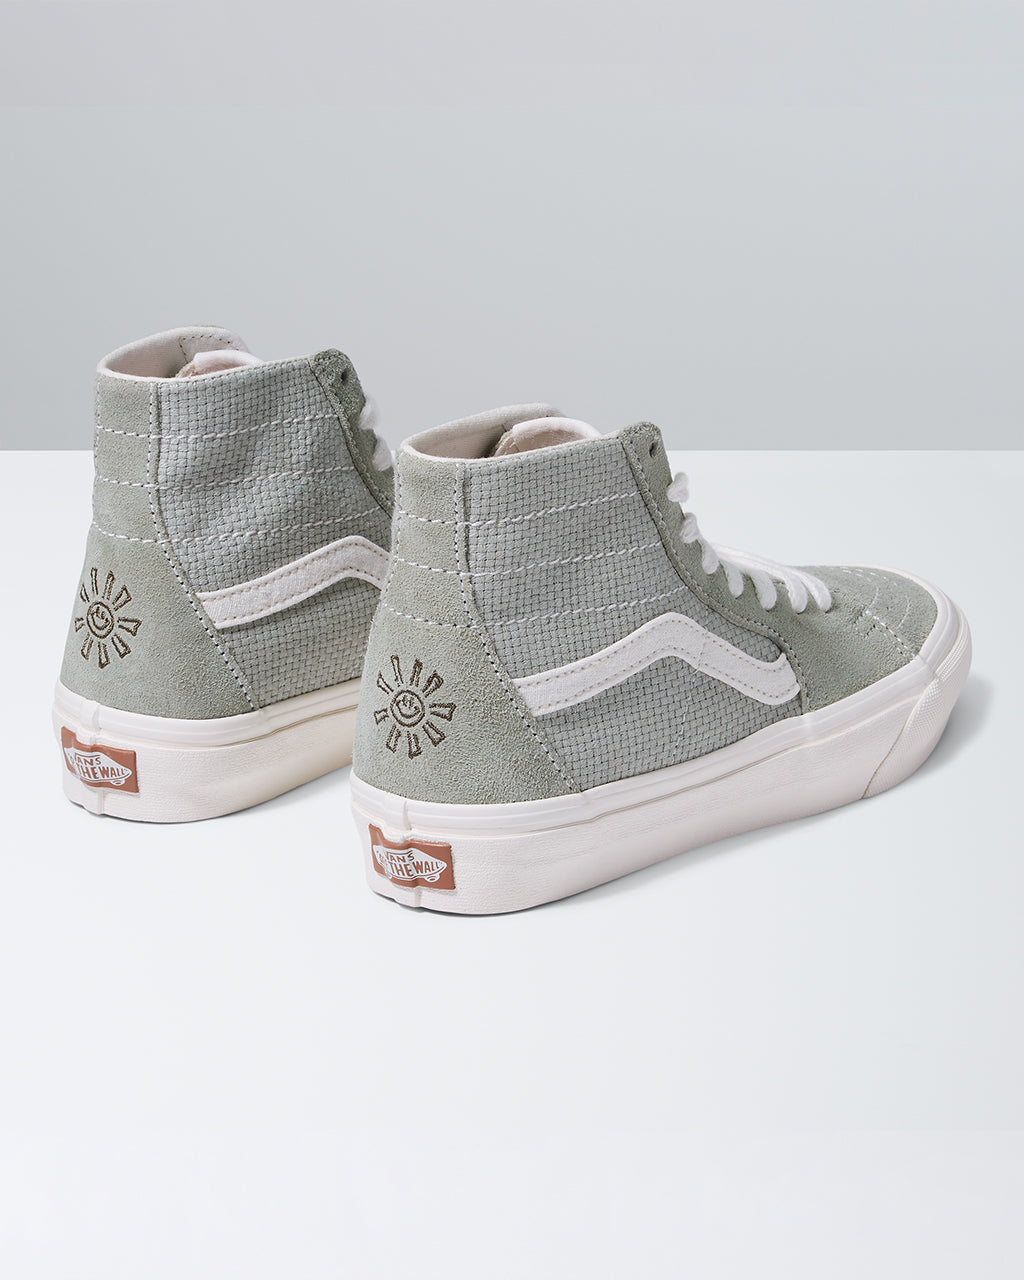 Maaltijd Haas argument Eco Theory Sk8-Hi Tapered - Green/Marshmallow by Vans - shoes - ban.do